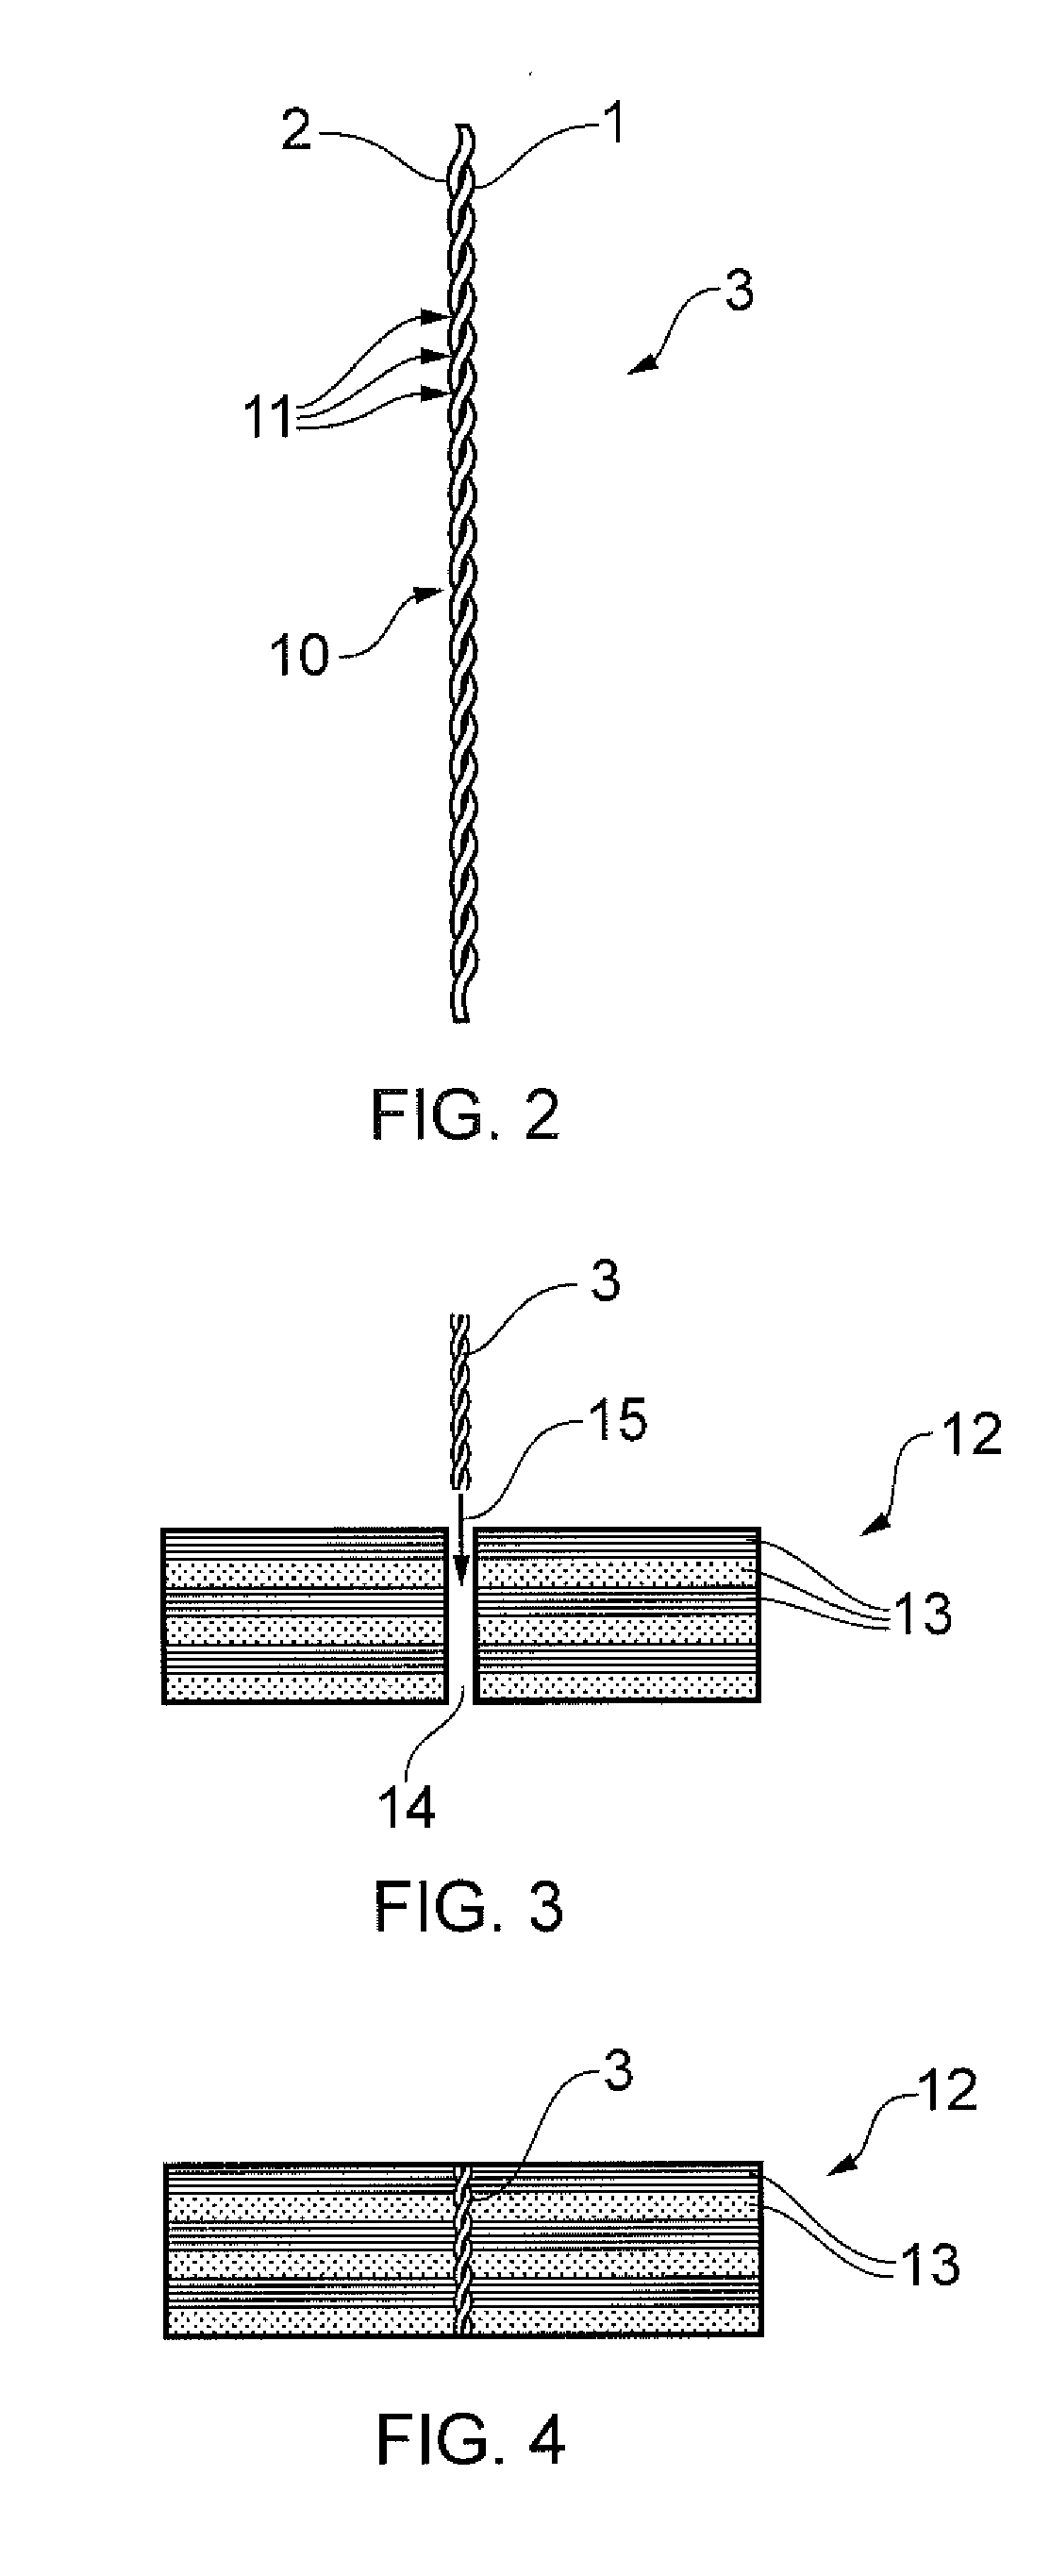 Laminated composite structure and related method